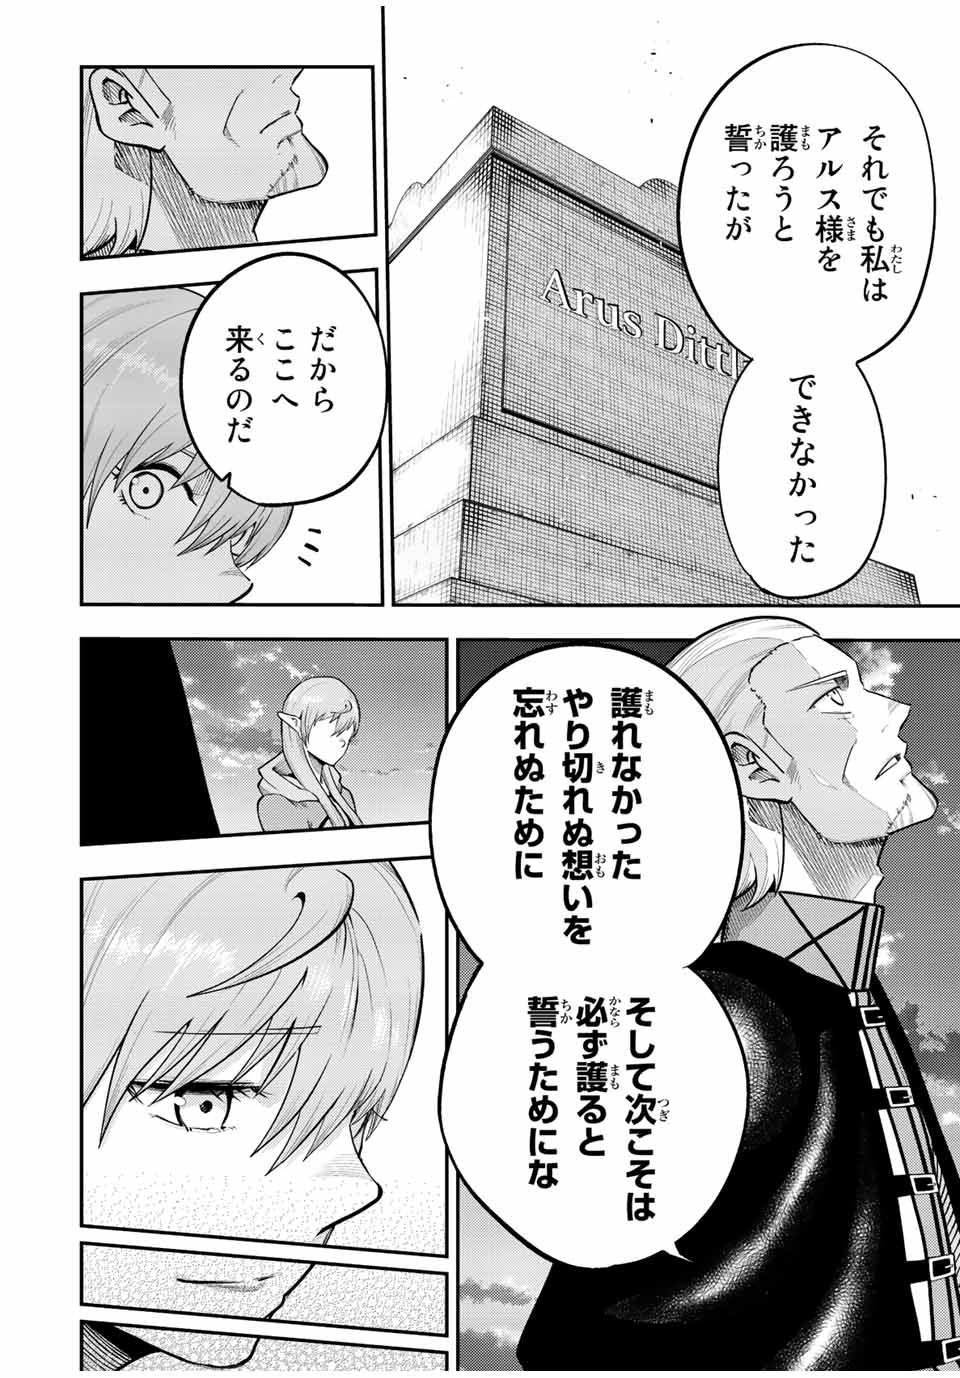 the strongest former prince-; 奴隷転生 ～その奴隷、最強の元王子につき～ 第116話 - Page 6